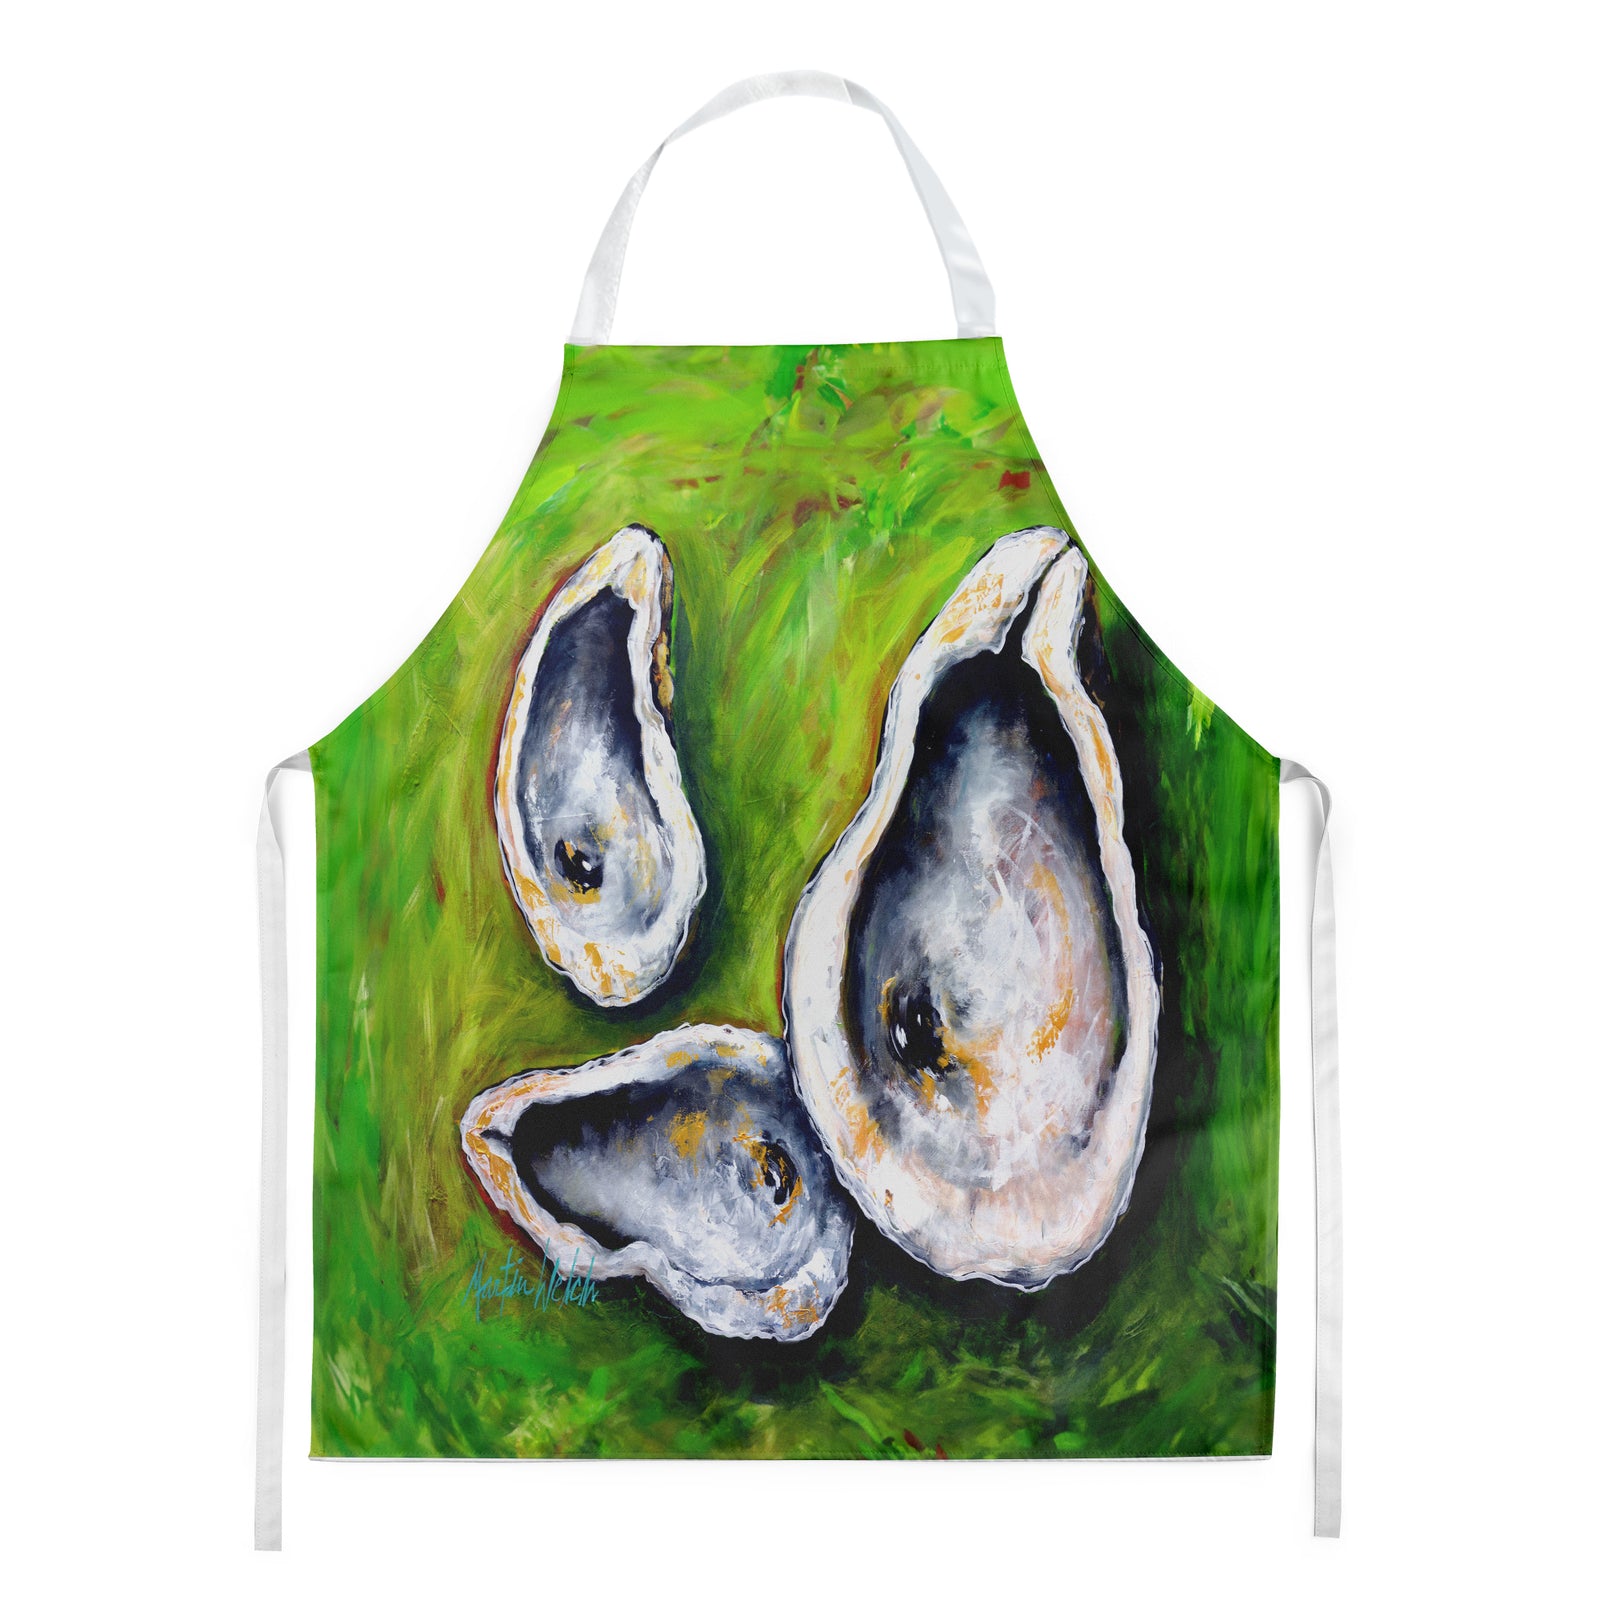 Buy this All Shucked Oysters Apron